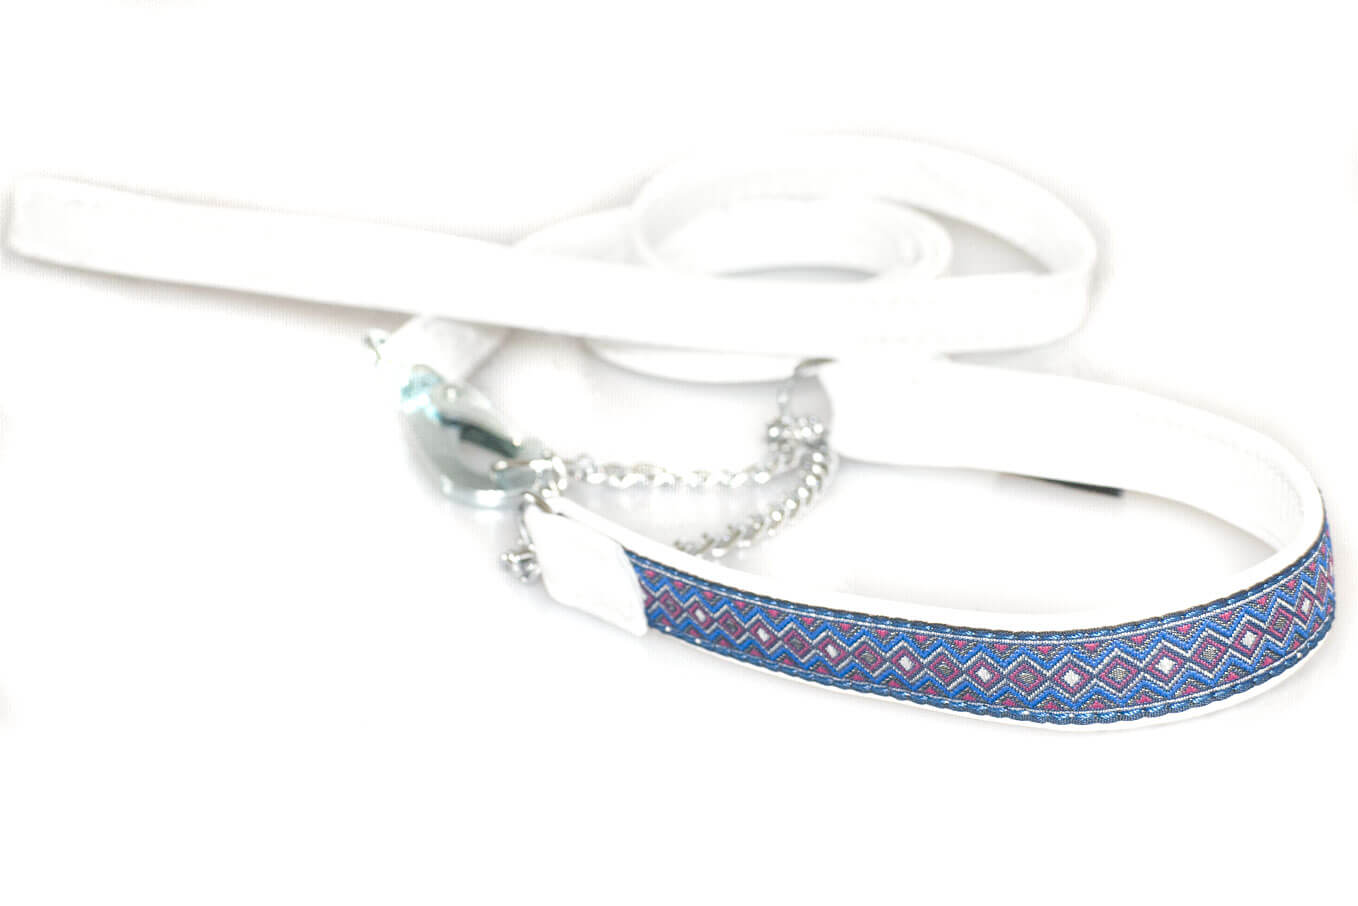 White nappa leather double stitched lead to match ribbon collars